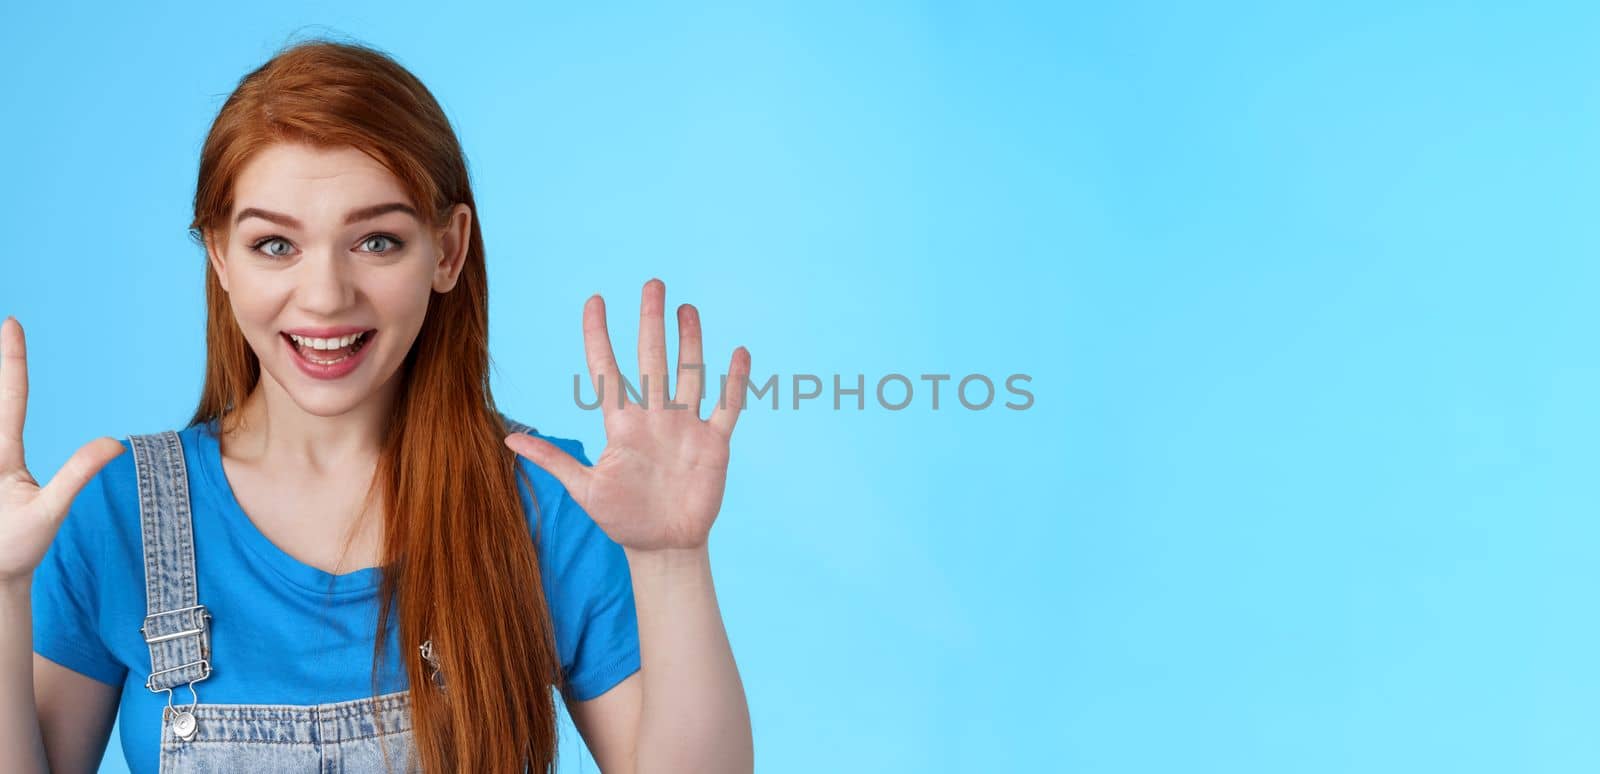 Close-up friendly joyful redhead caucasian girl, long ginger hairstyle, raise hands show number ten, counting dozer, explain fingers, raise arms surrender, smiling joyful, stand blue background.